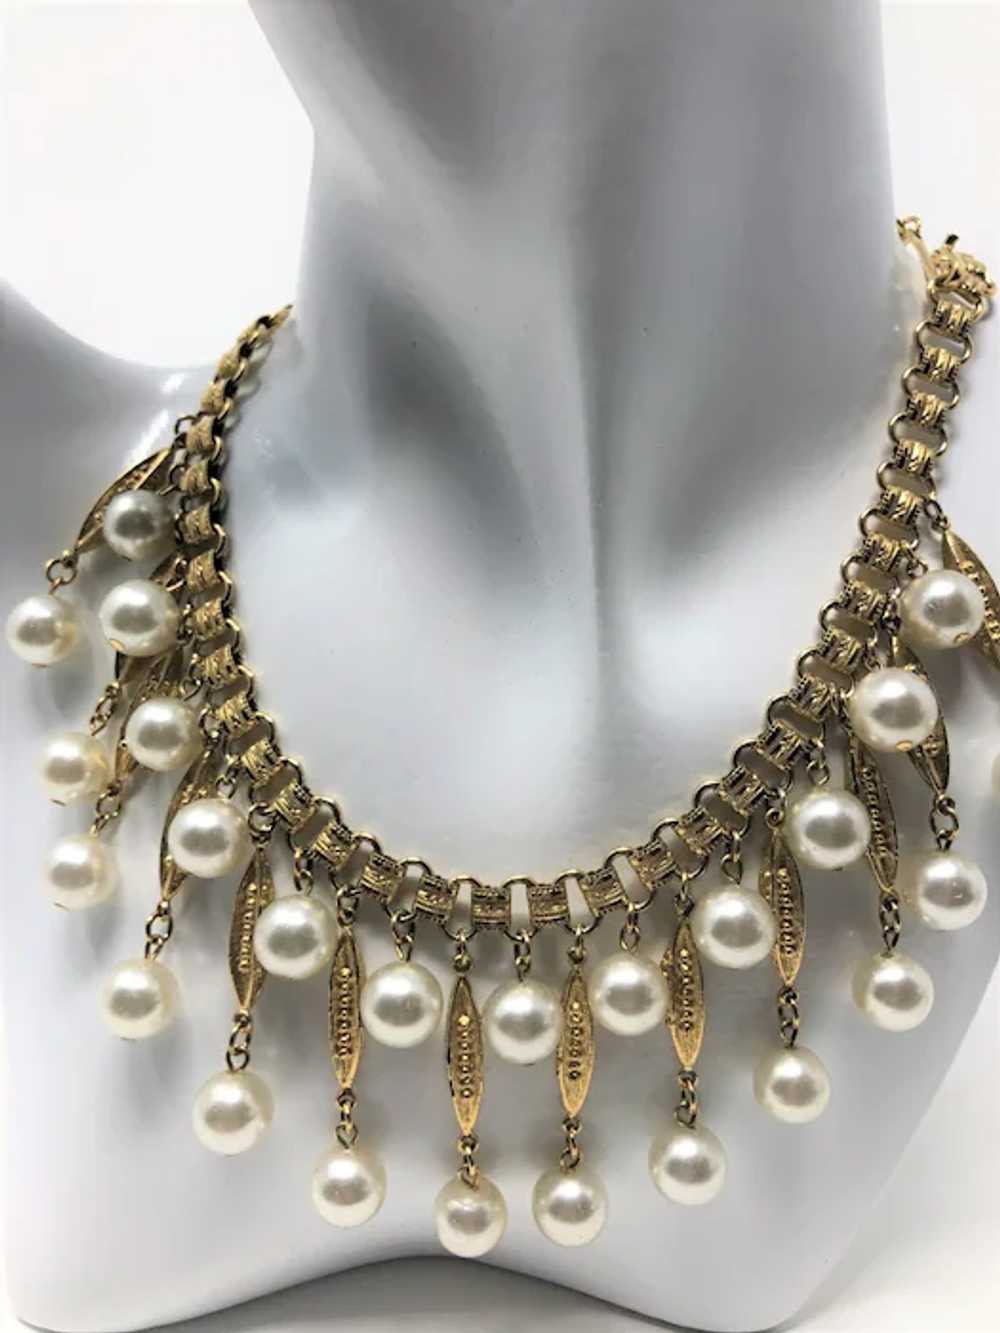 Beautiful Coro 60's Faux Pearl Necklace - image 8